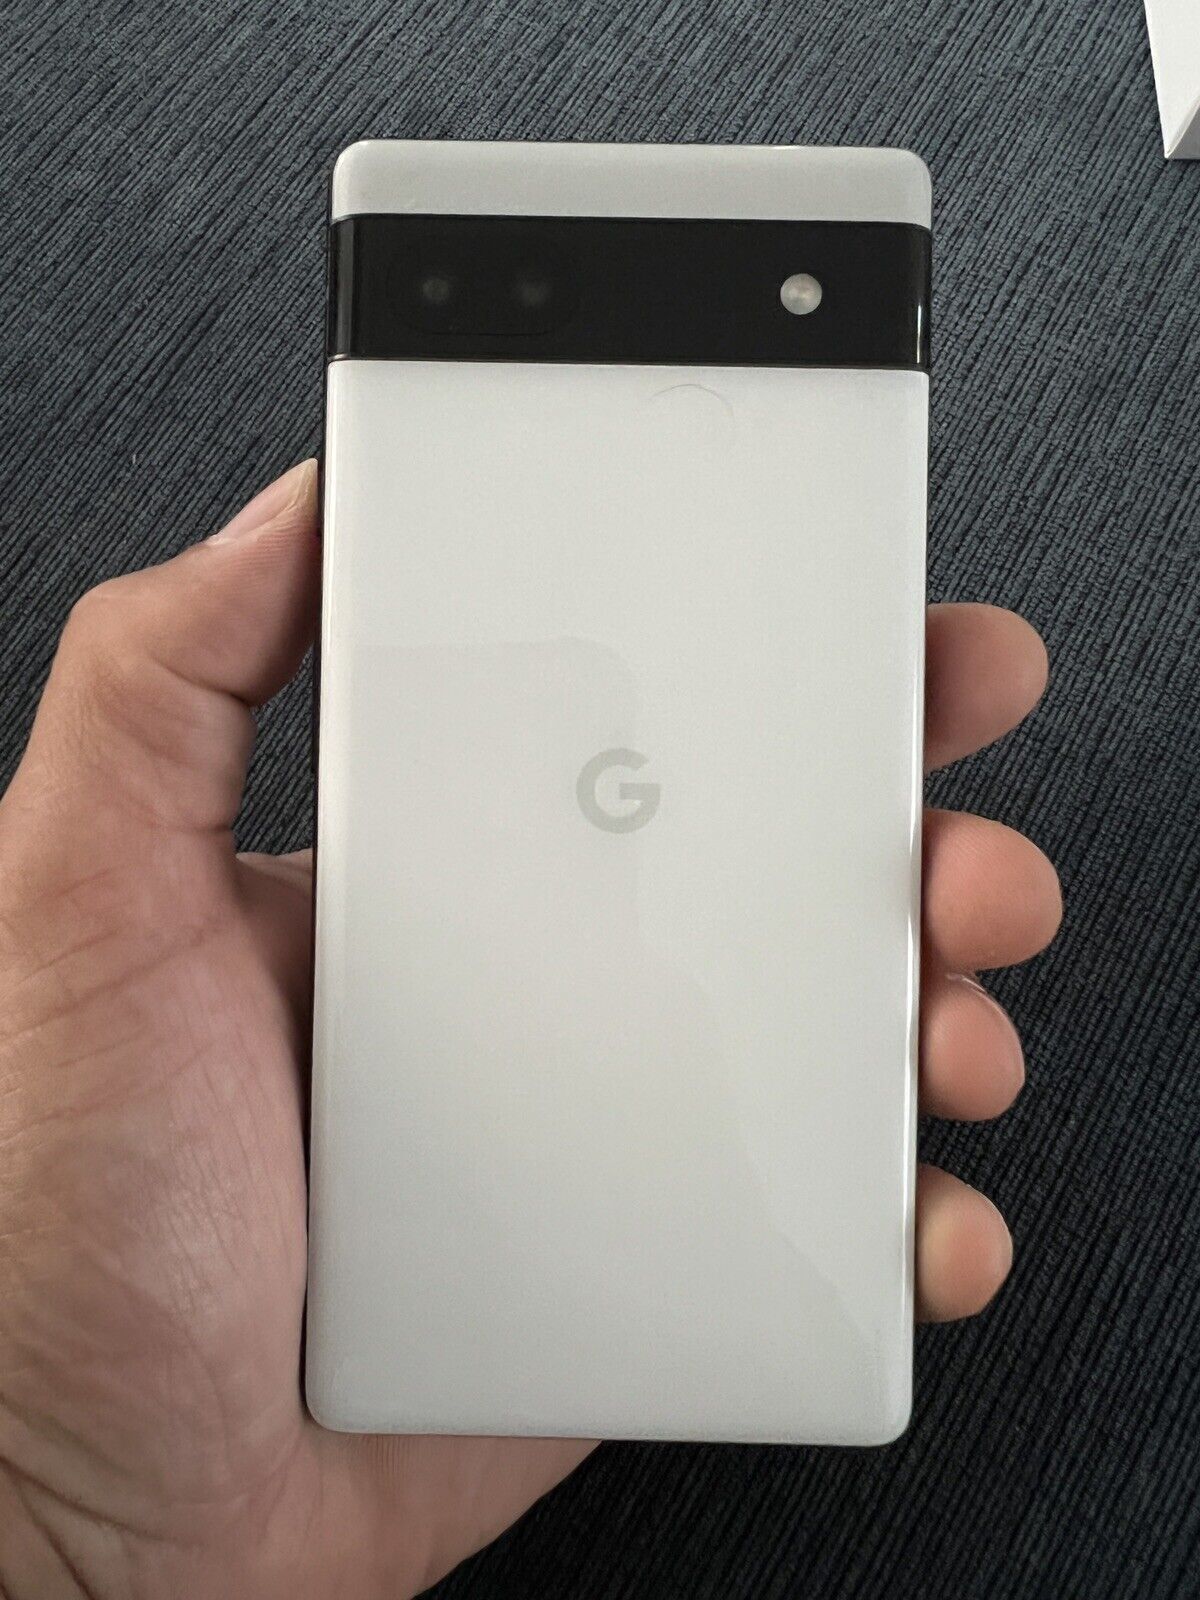 NEW! Google Pixel 6a 5G - 128GB Unlocked All Carriers (Charcoal, Sage, or  Chalk)